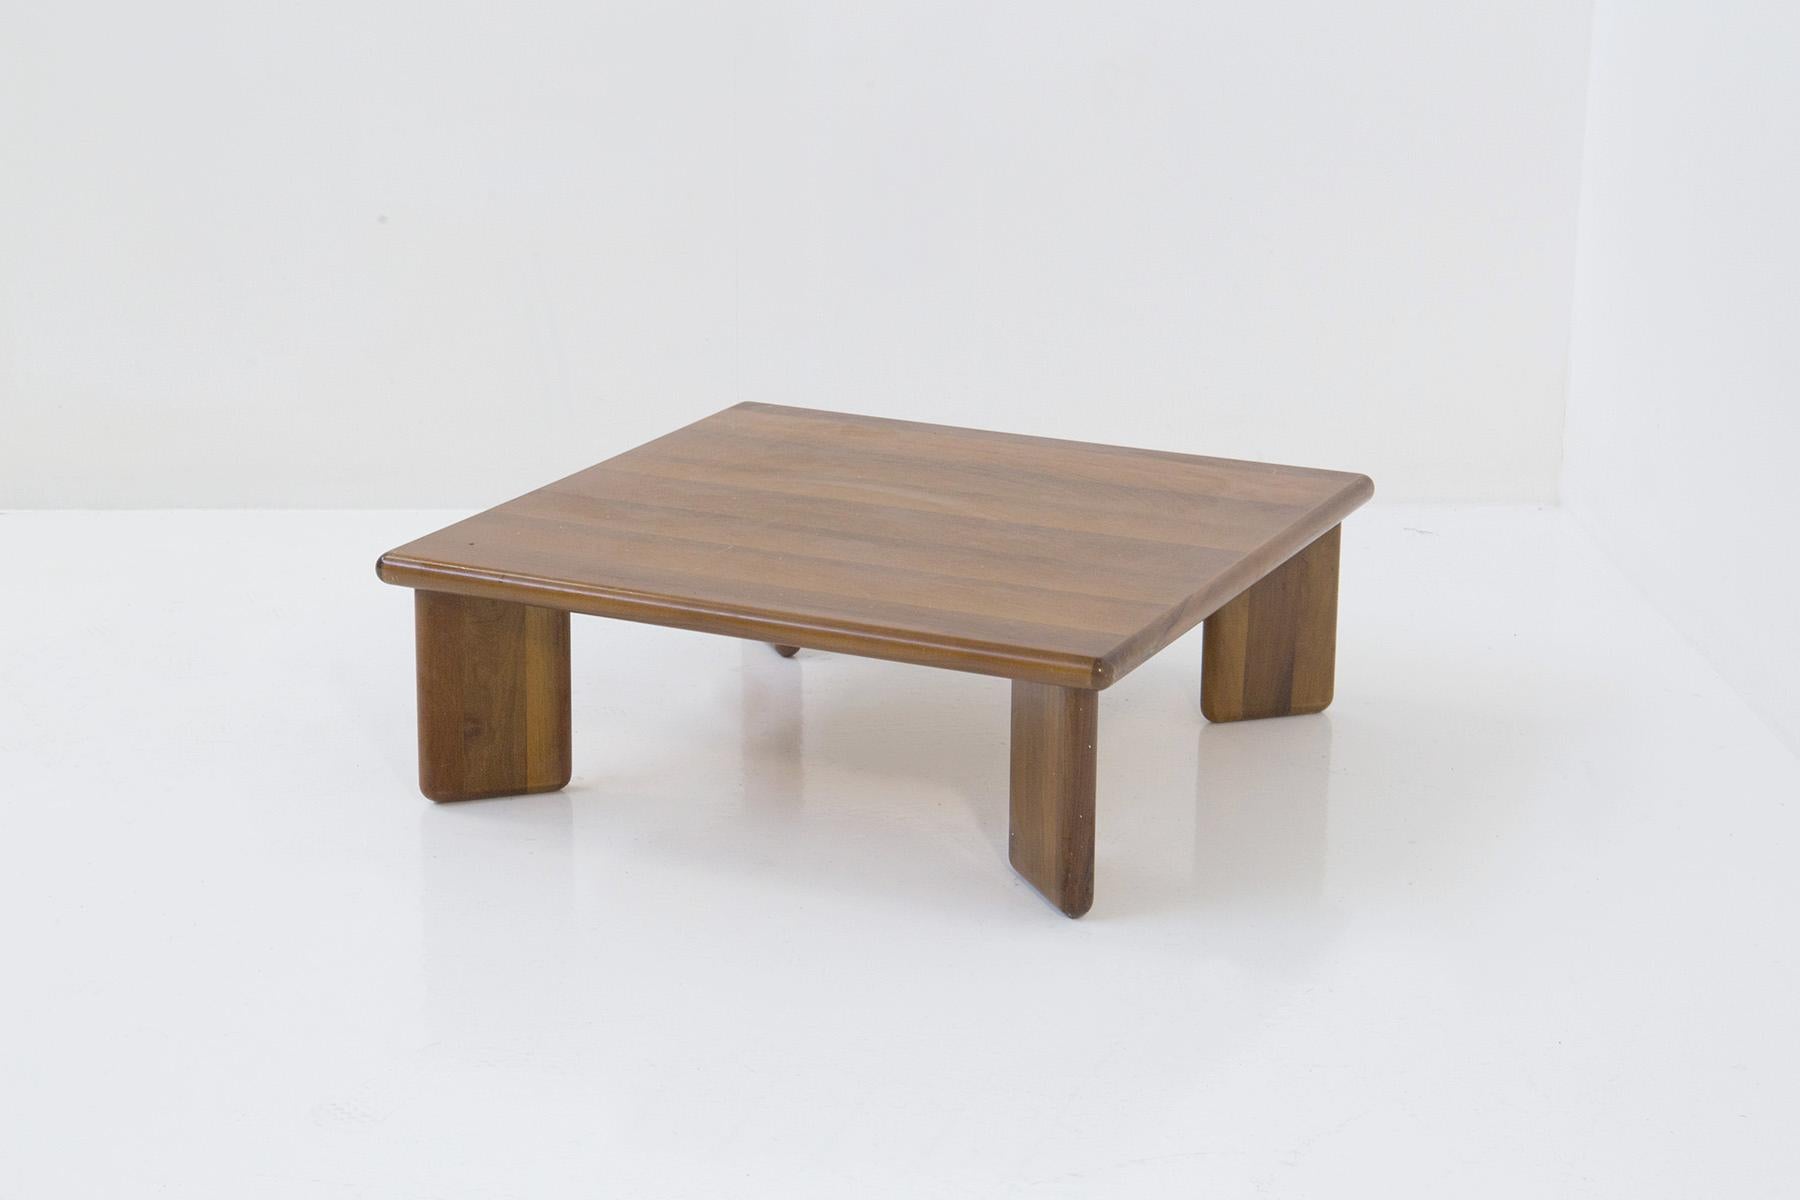 Introducing the Sapporo Wood Coffee Table from the prestigious Mobil Girgi manufacture, crafted with utmost elegance and timeless charm dating back to the 1970s. Meticulously fashioned from  wood with a captivating grain, this masterpiece brings an